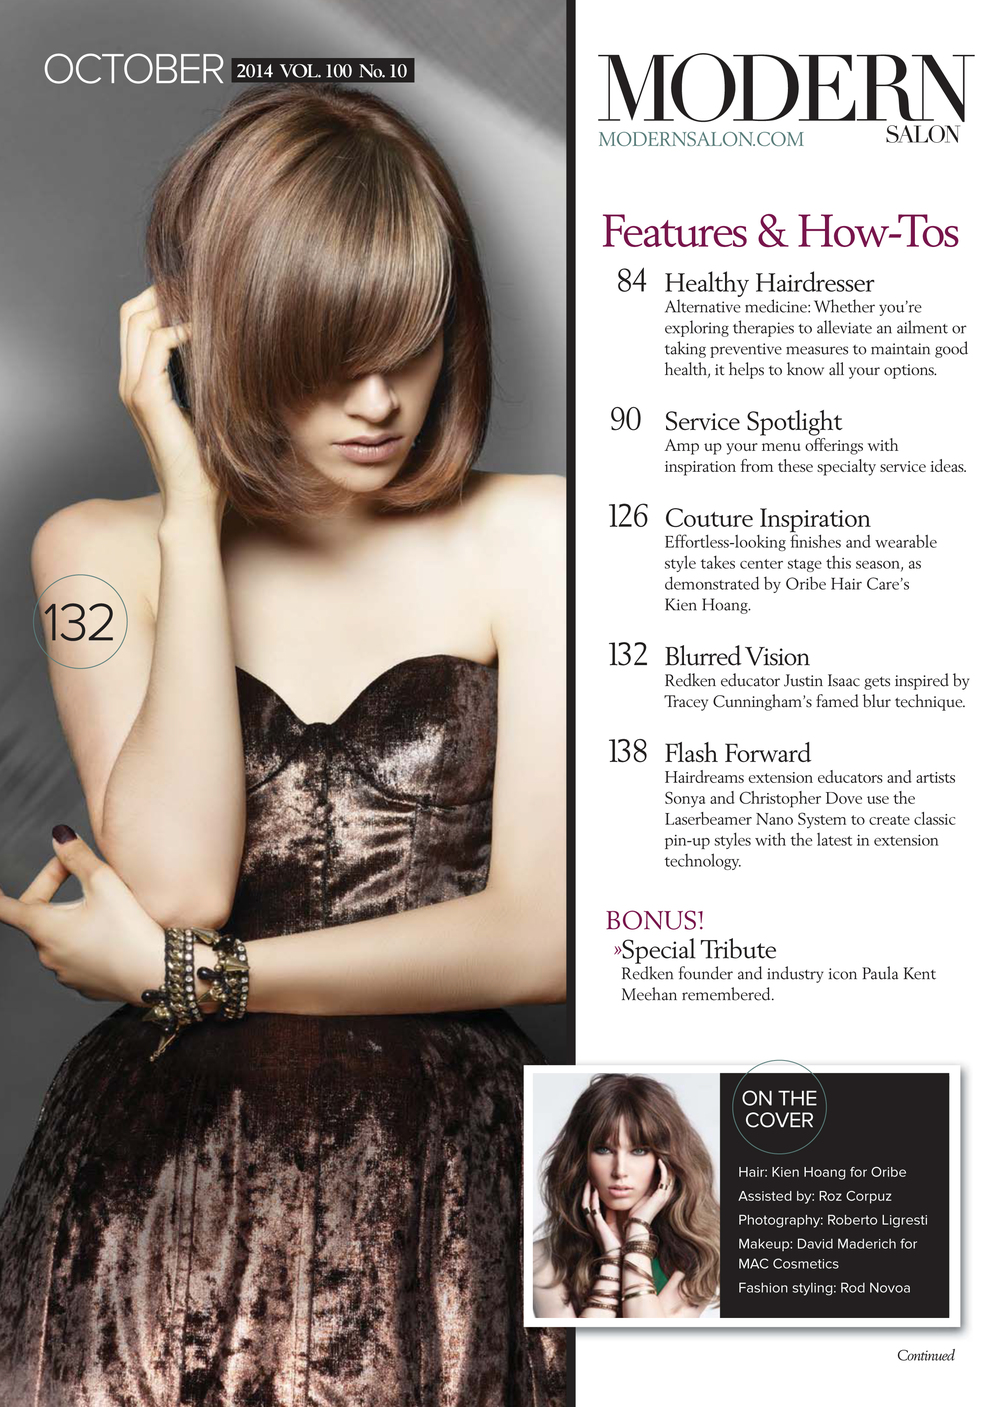 Modern Salon Cover | October Issue | Hair by Kien Hoang